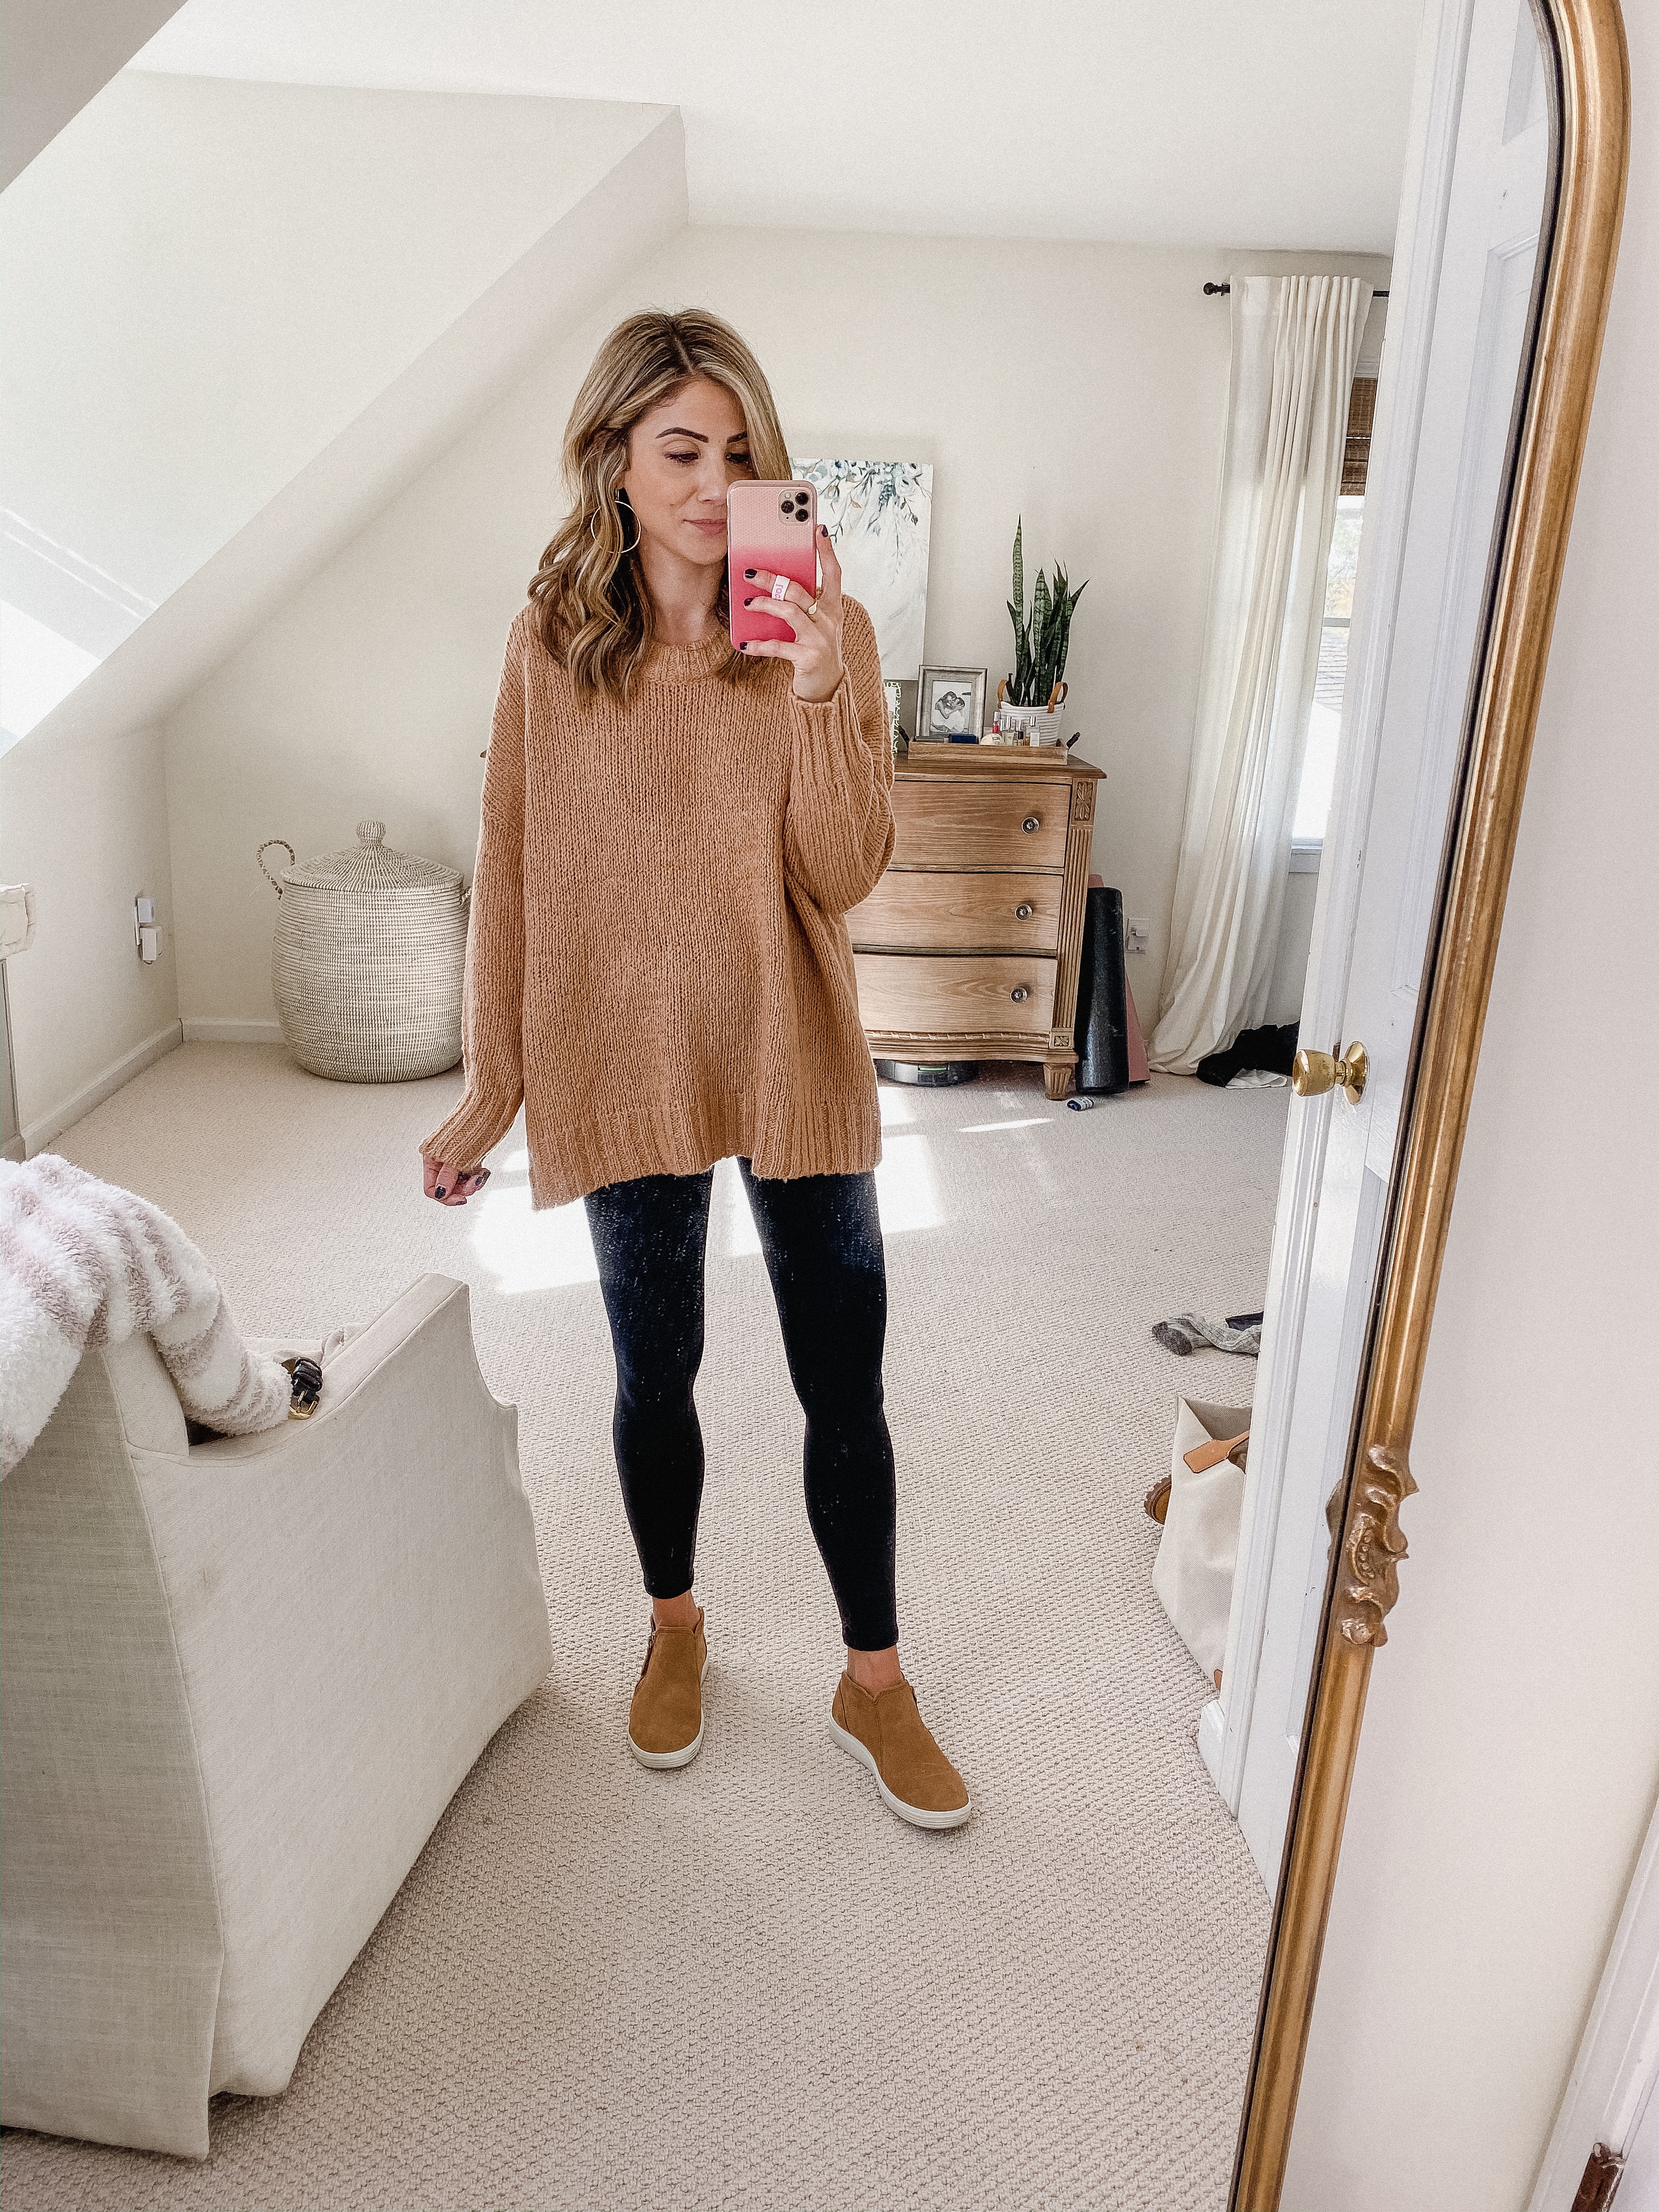 Connecticut life and style blogger Lauren McBride shares seven causal mom outfits for fall including outfits that are comfortable, yet stylish.